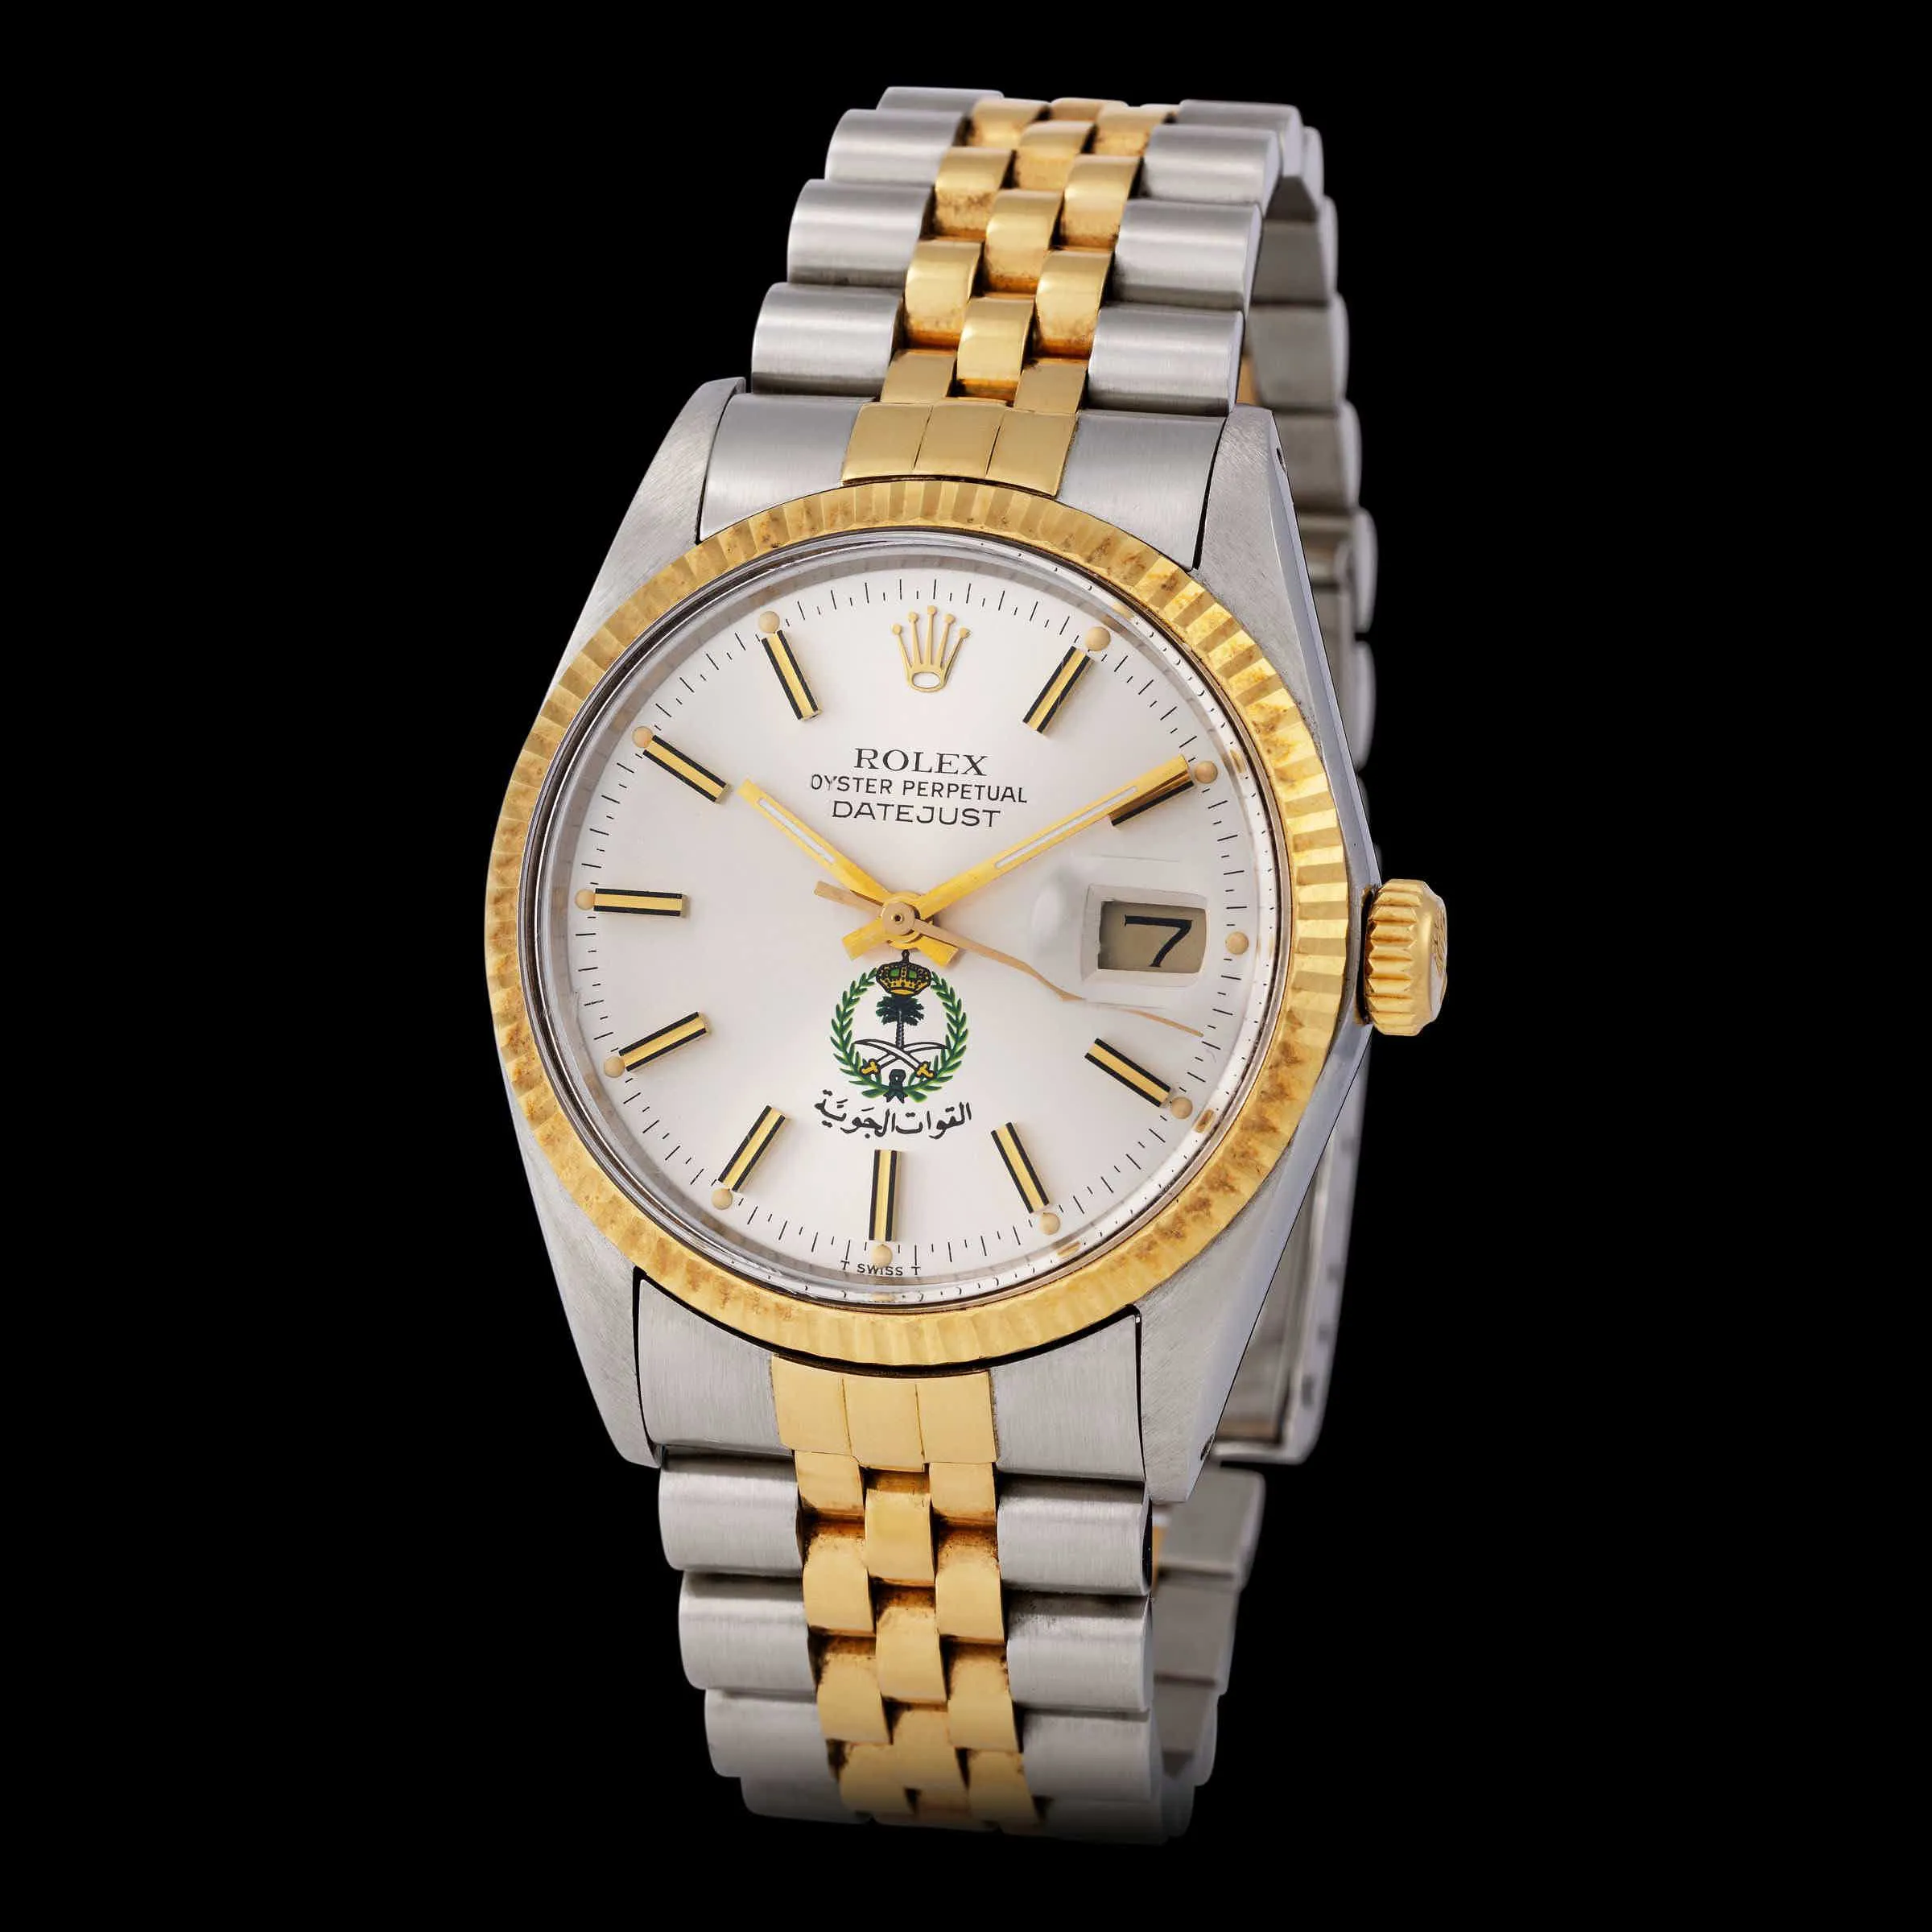 Rolex Datejust 16013 36mm Yellow gold and stainless steel